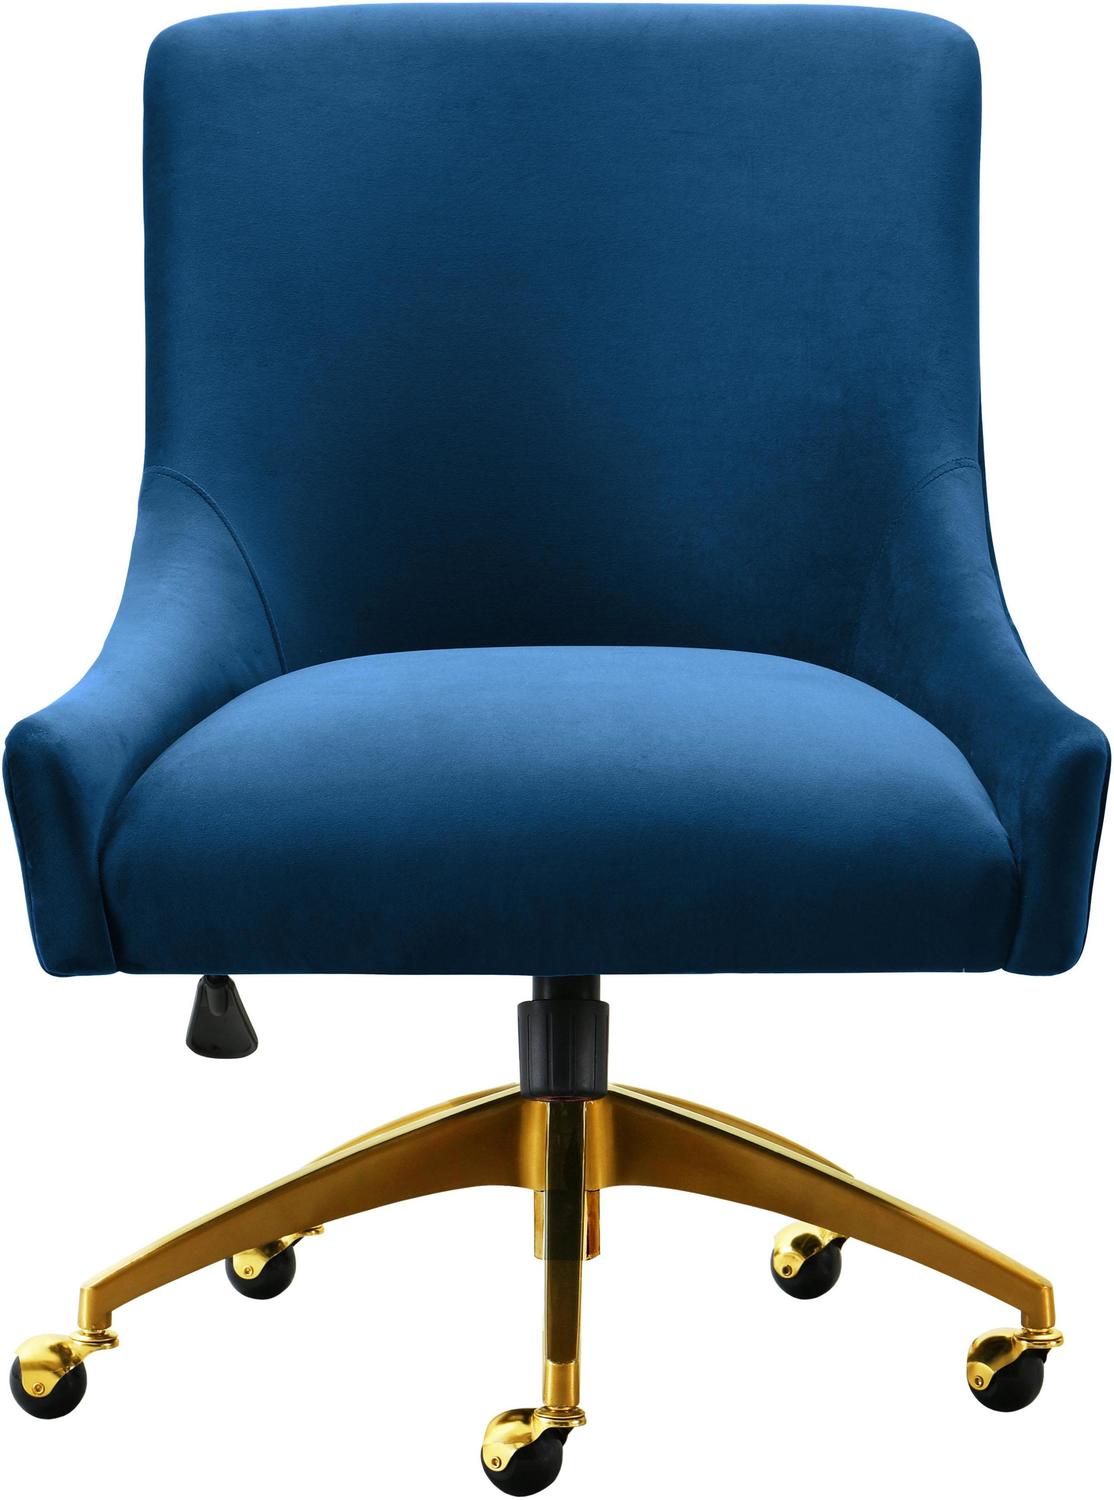 arm chairs for small spaces Contemporary Design Furniture Accent Chairs Navy